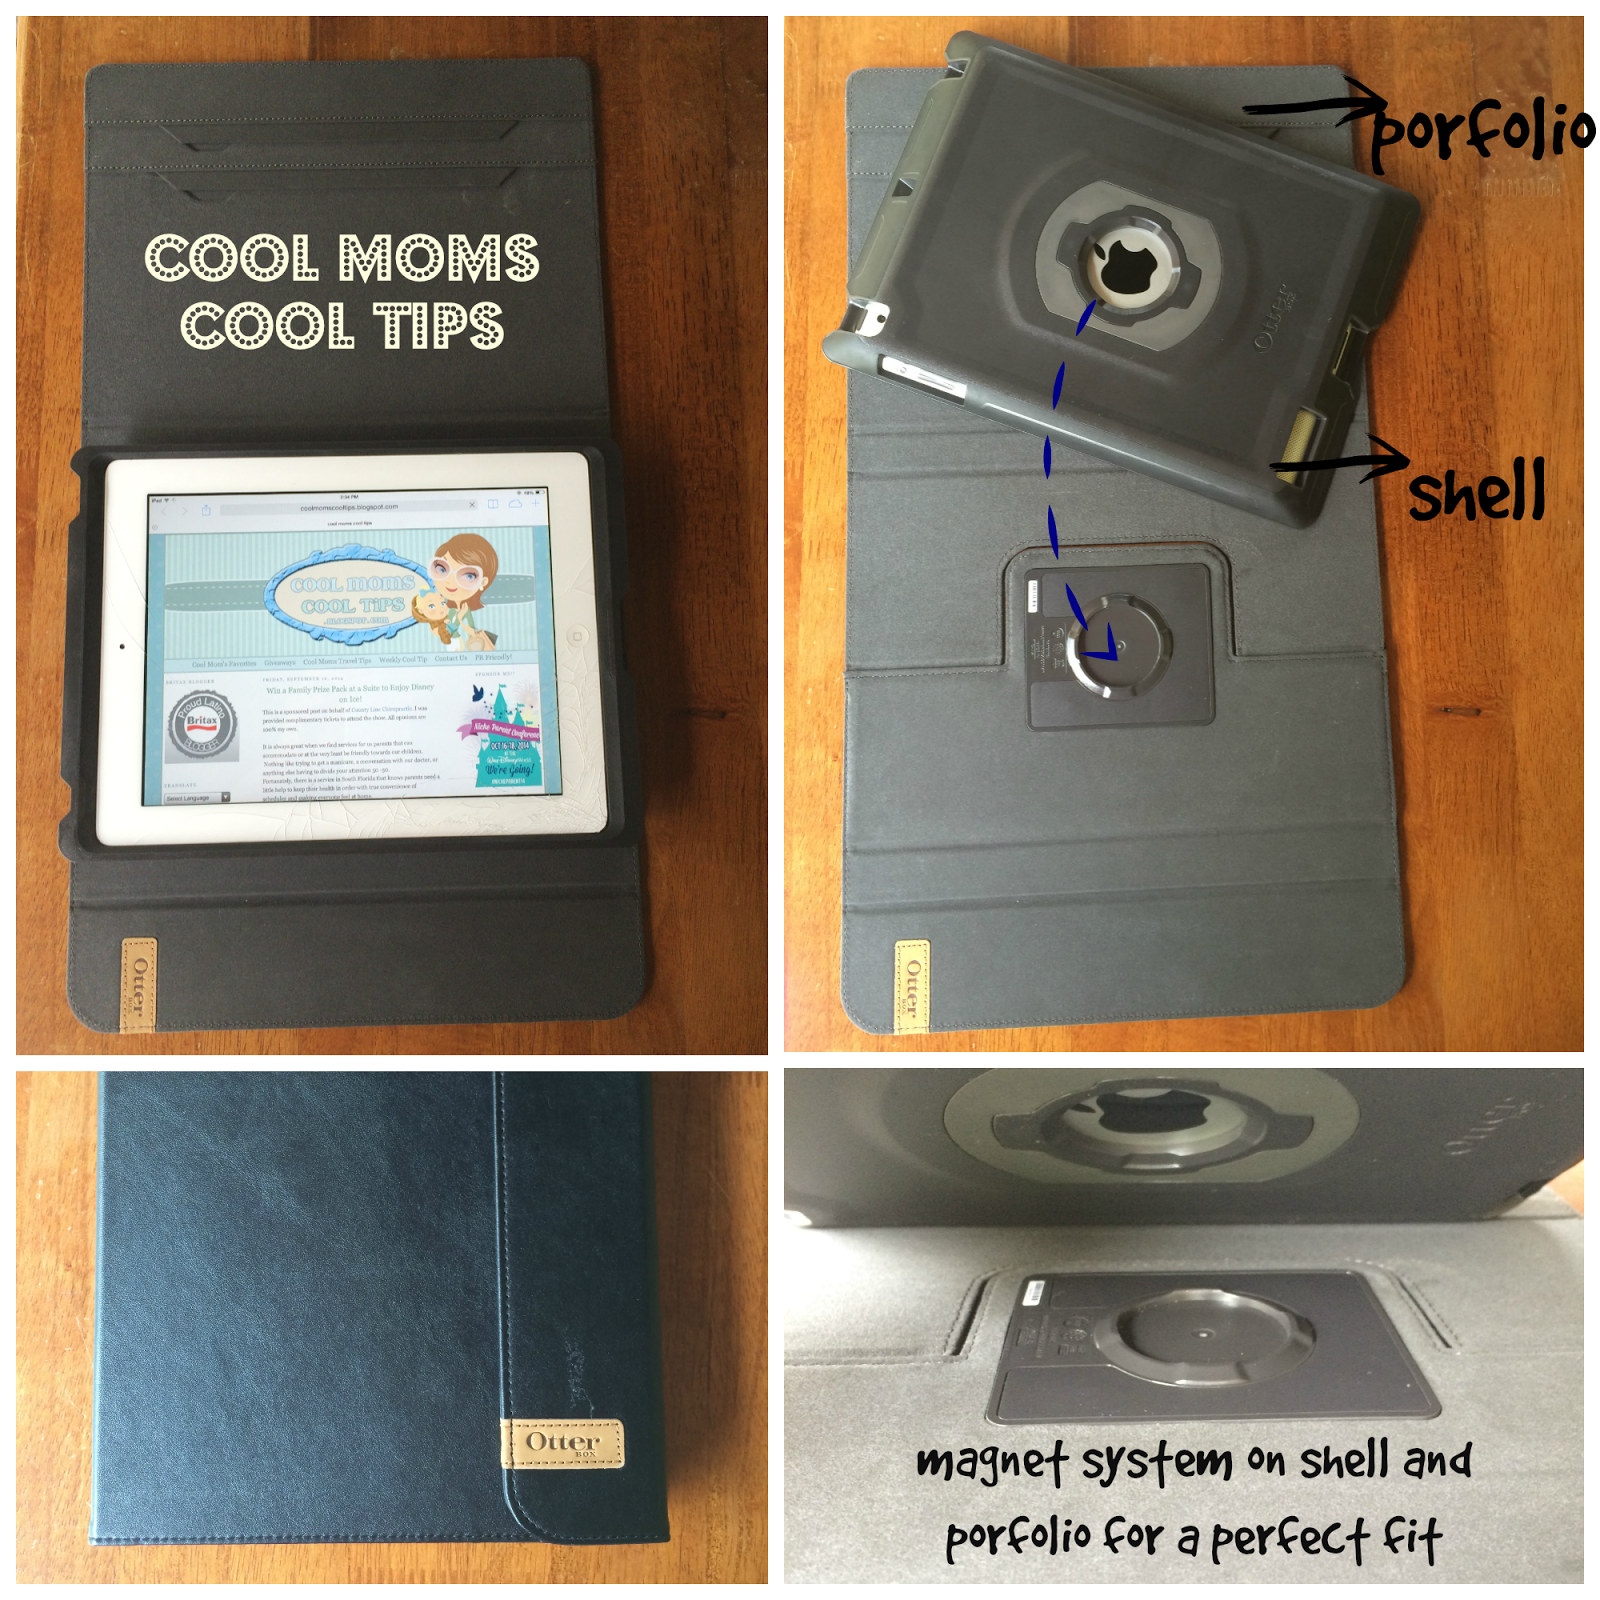 cool moms cool tips Otterbox agility system - portfolio